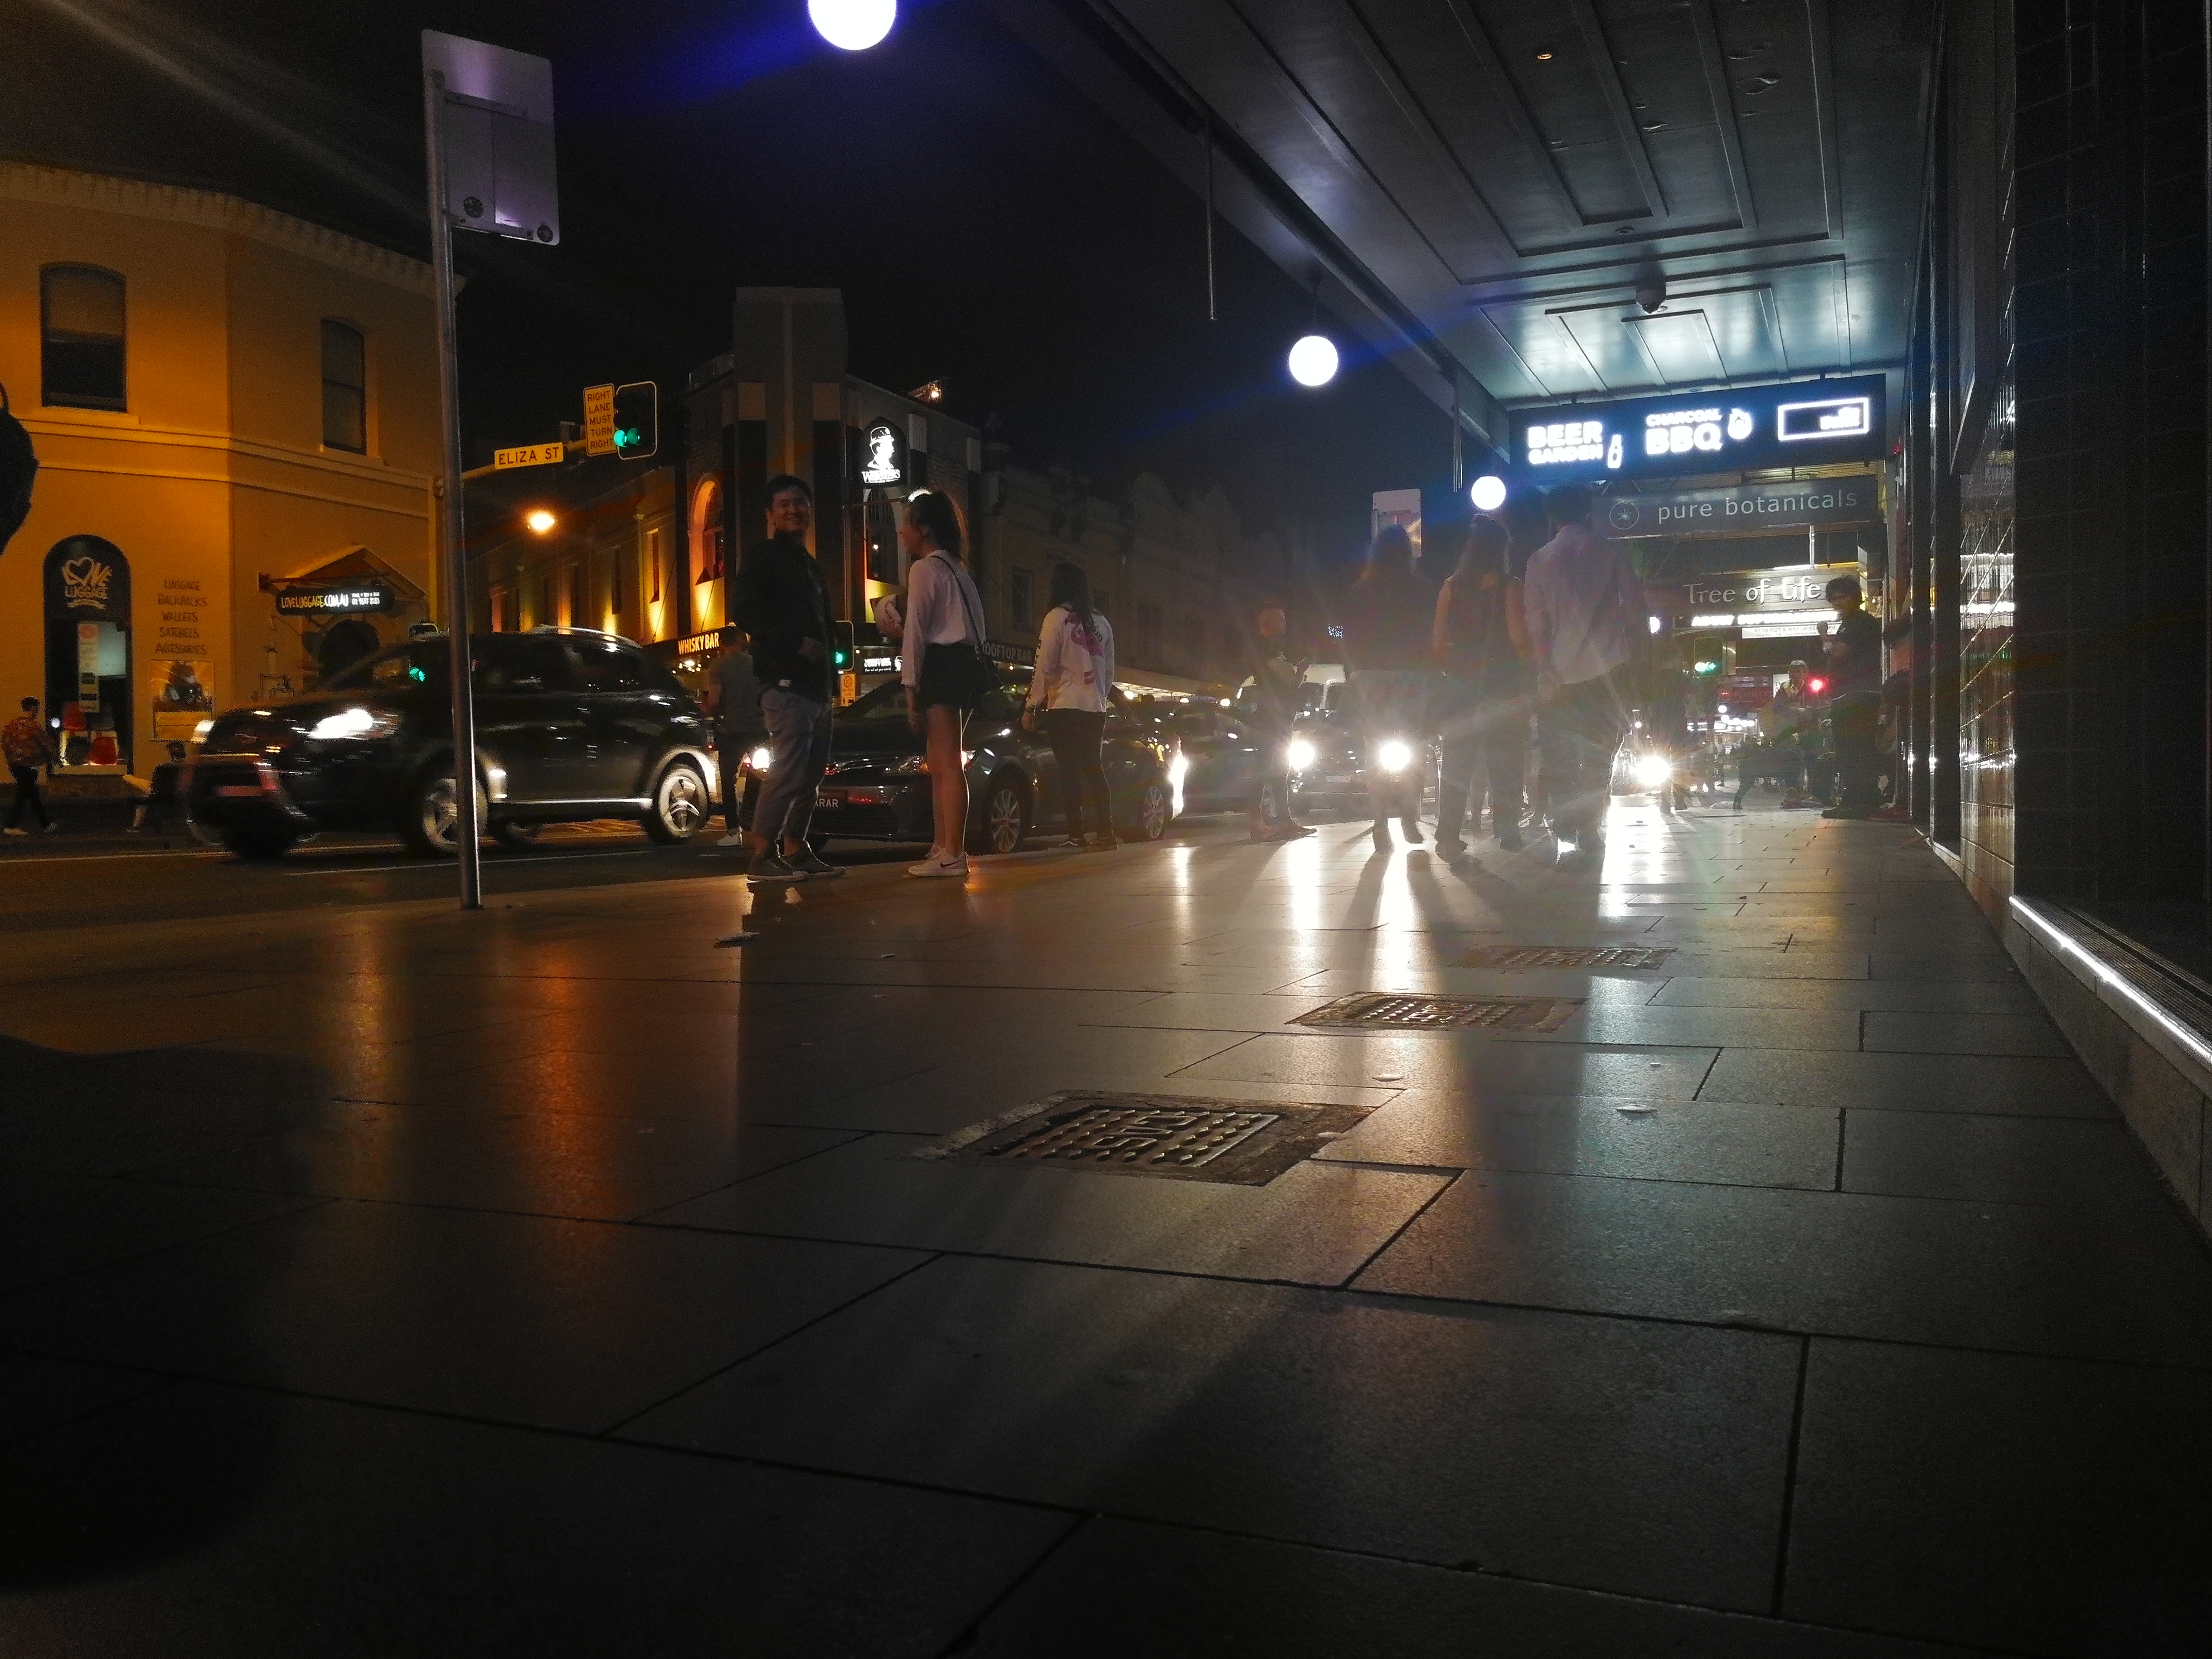 Cars beam their lights down King Street while revellers search for a party. Image: Christopher Kelly